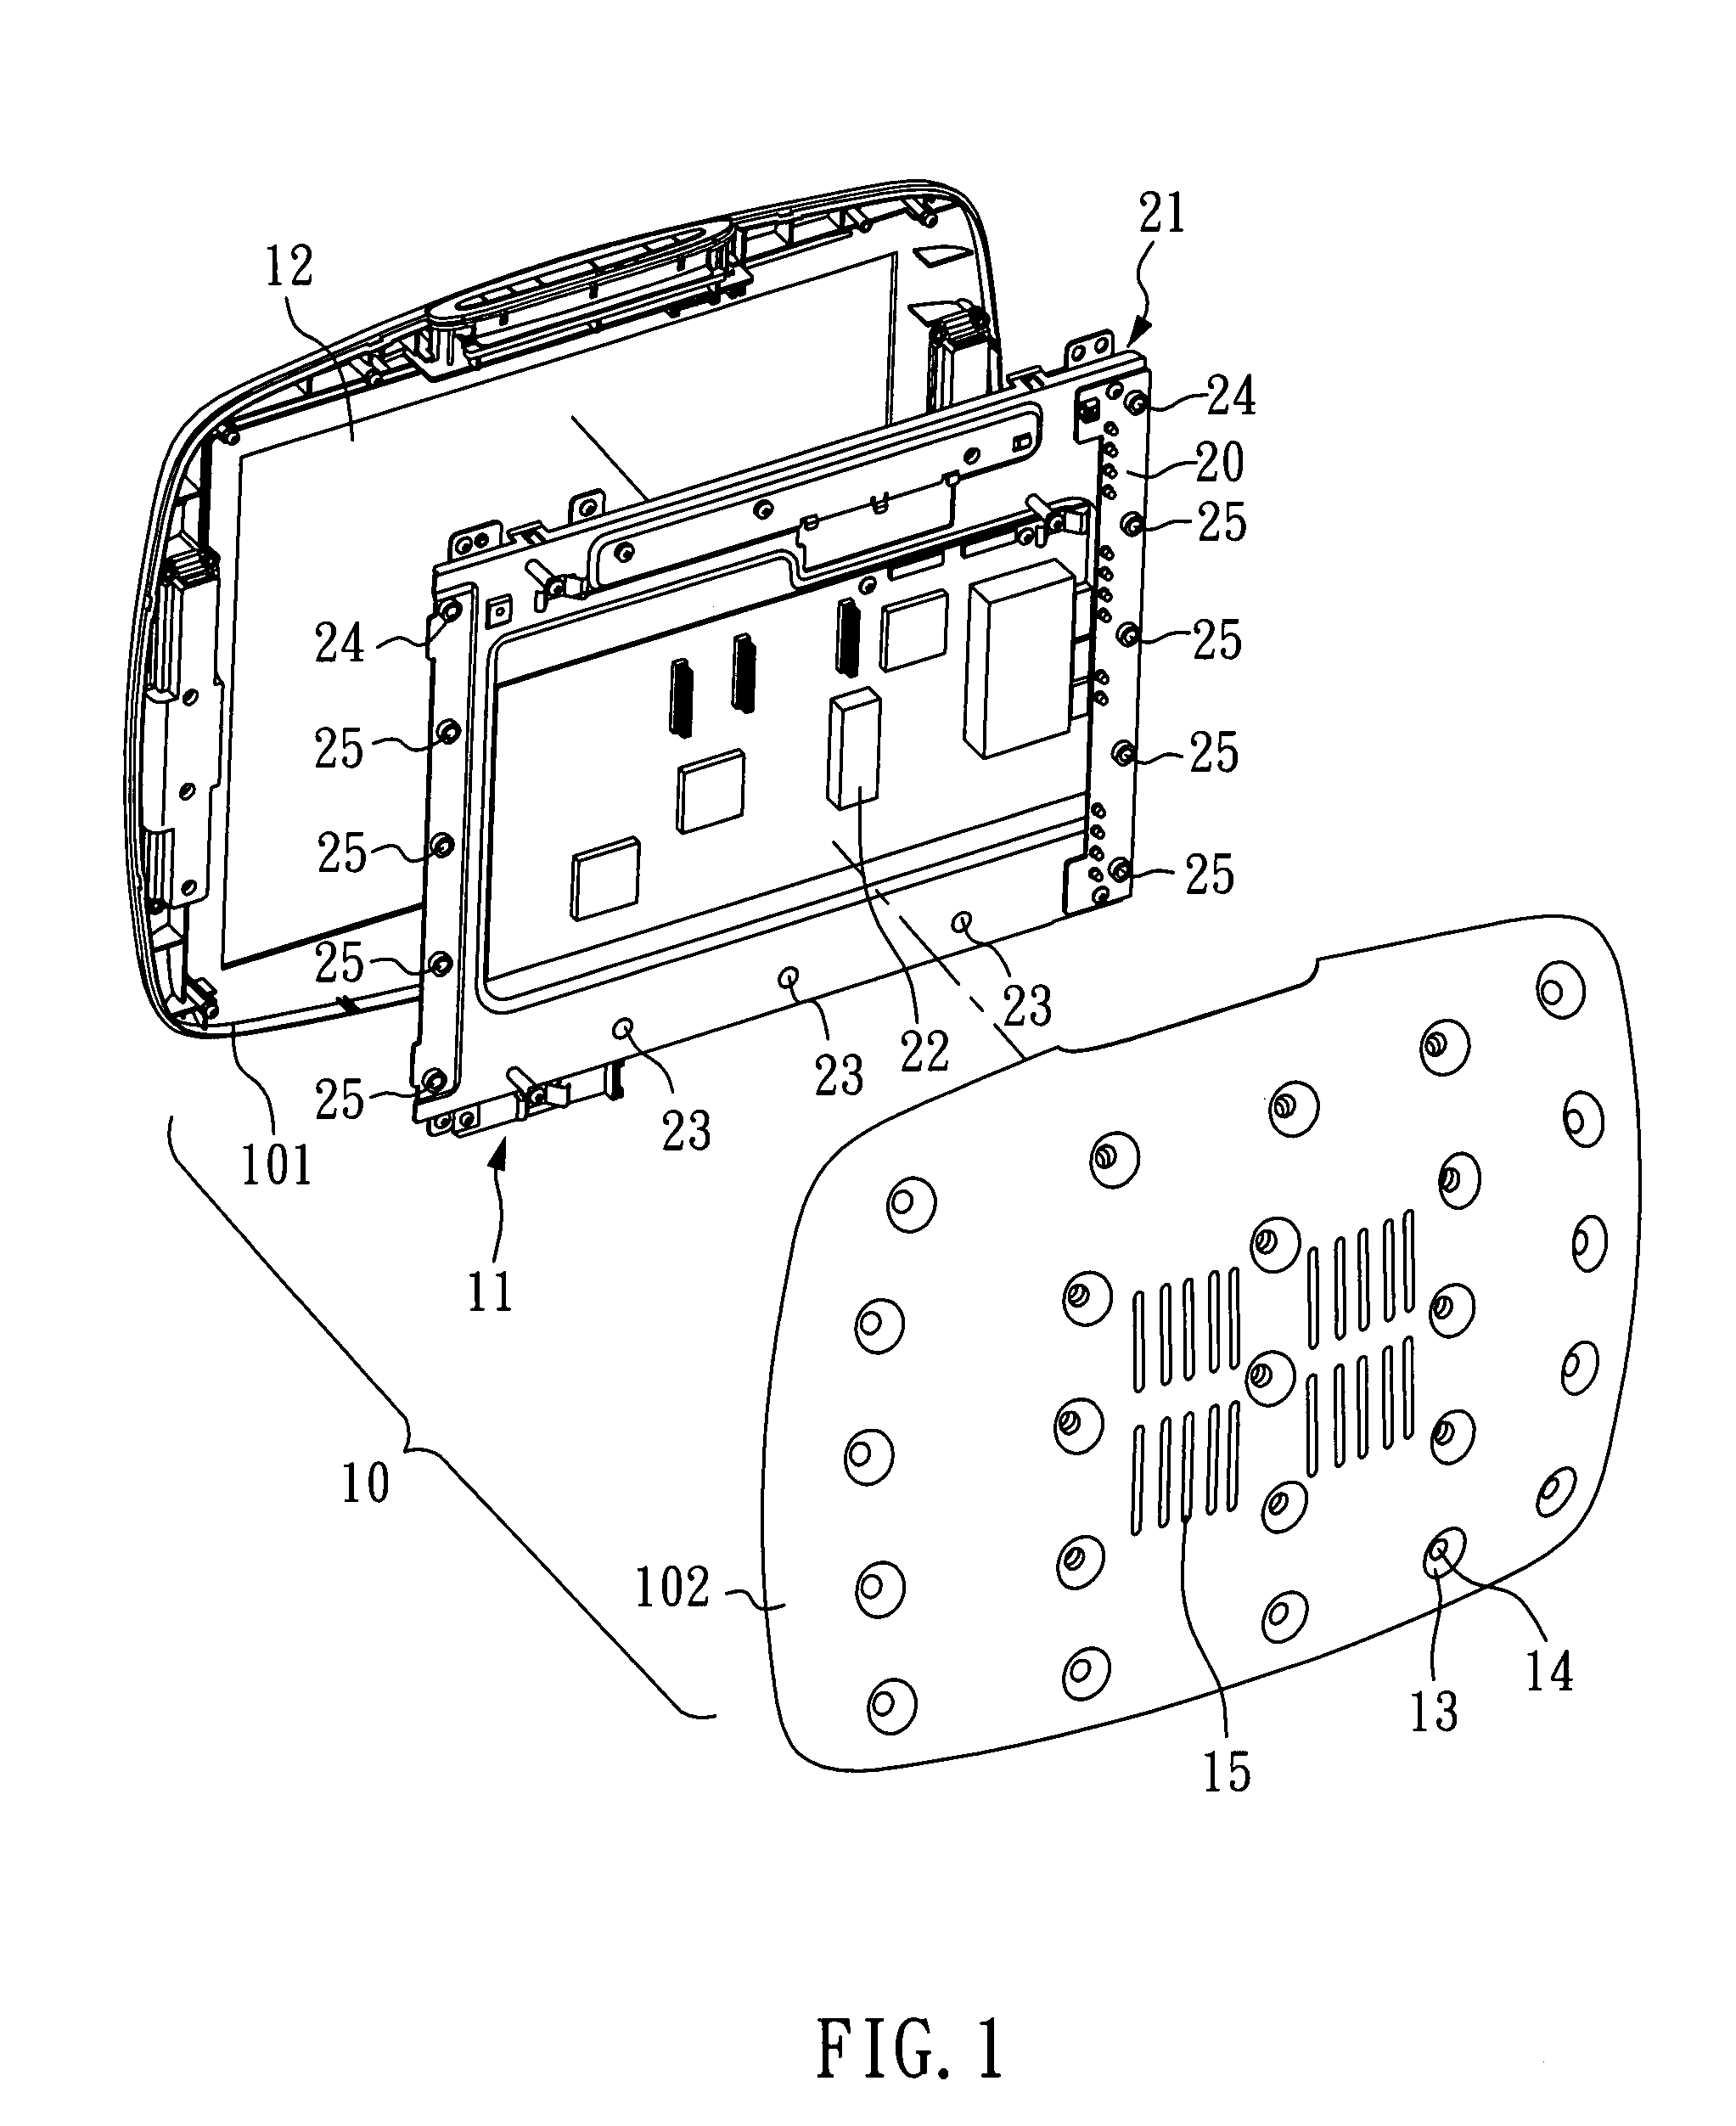 Assemblable display device